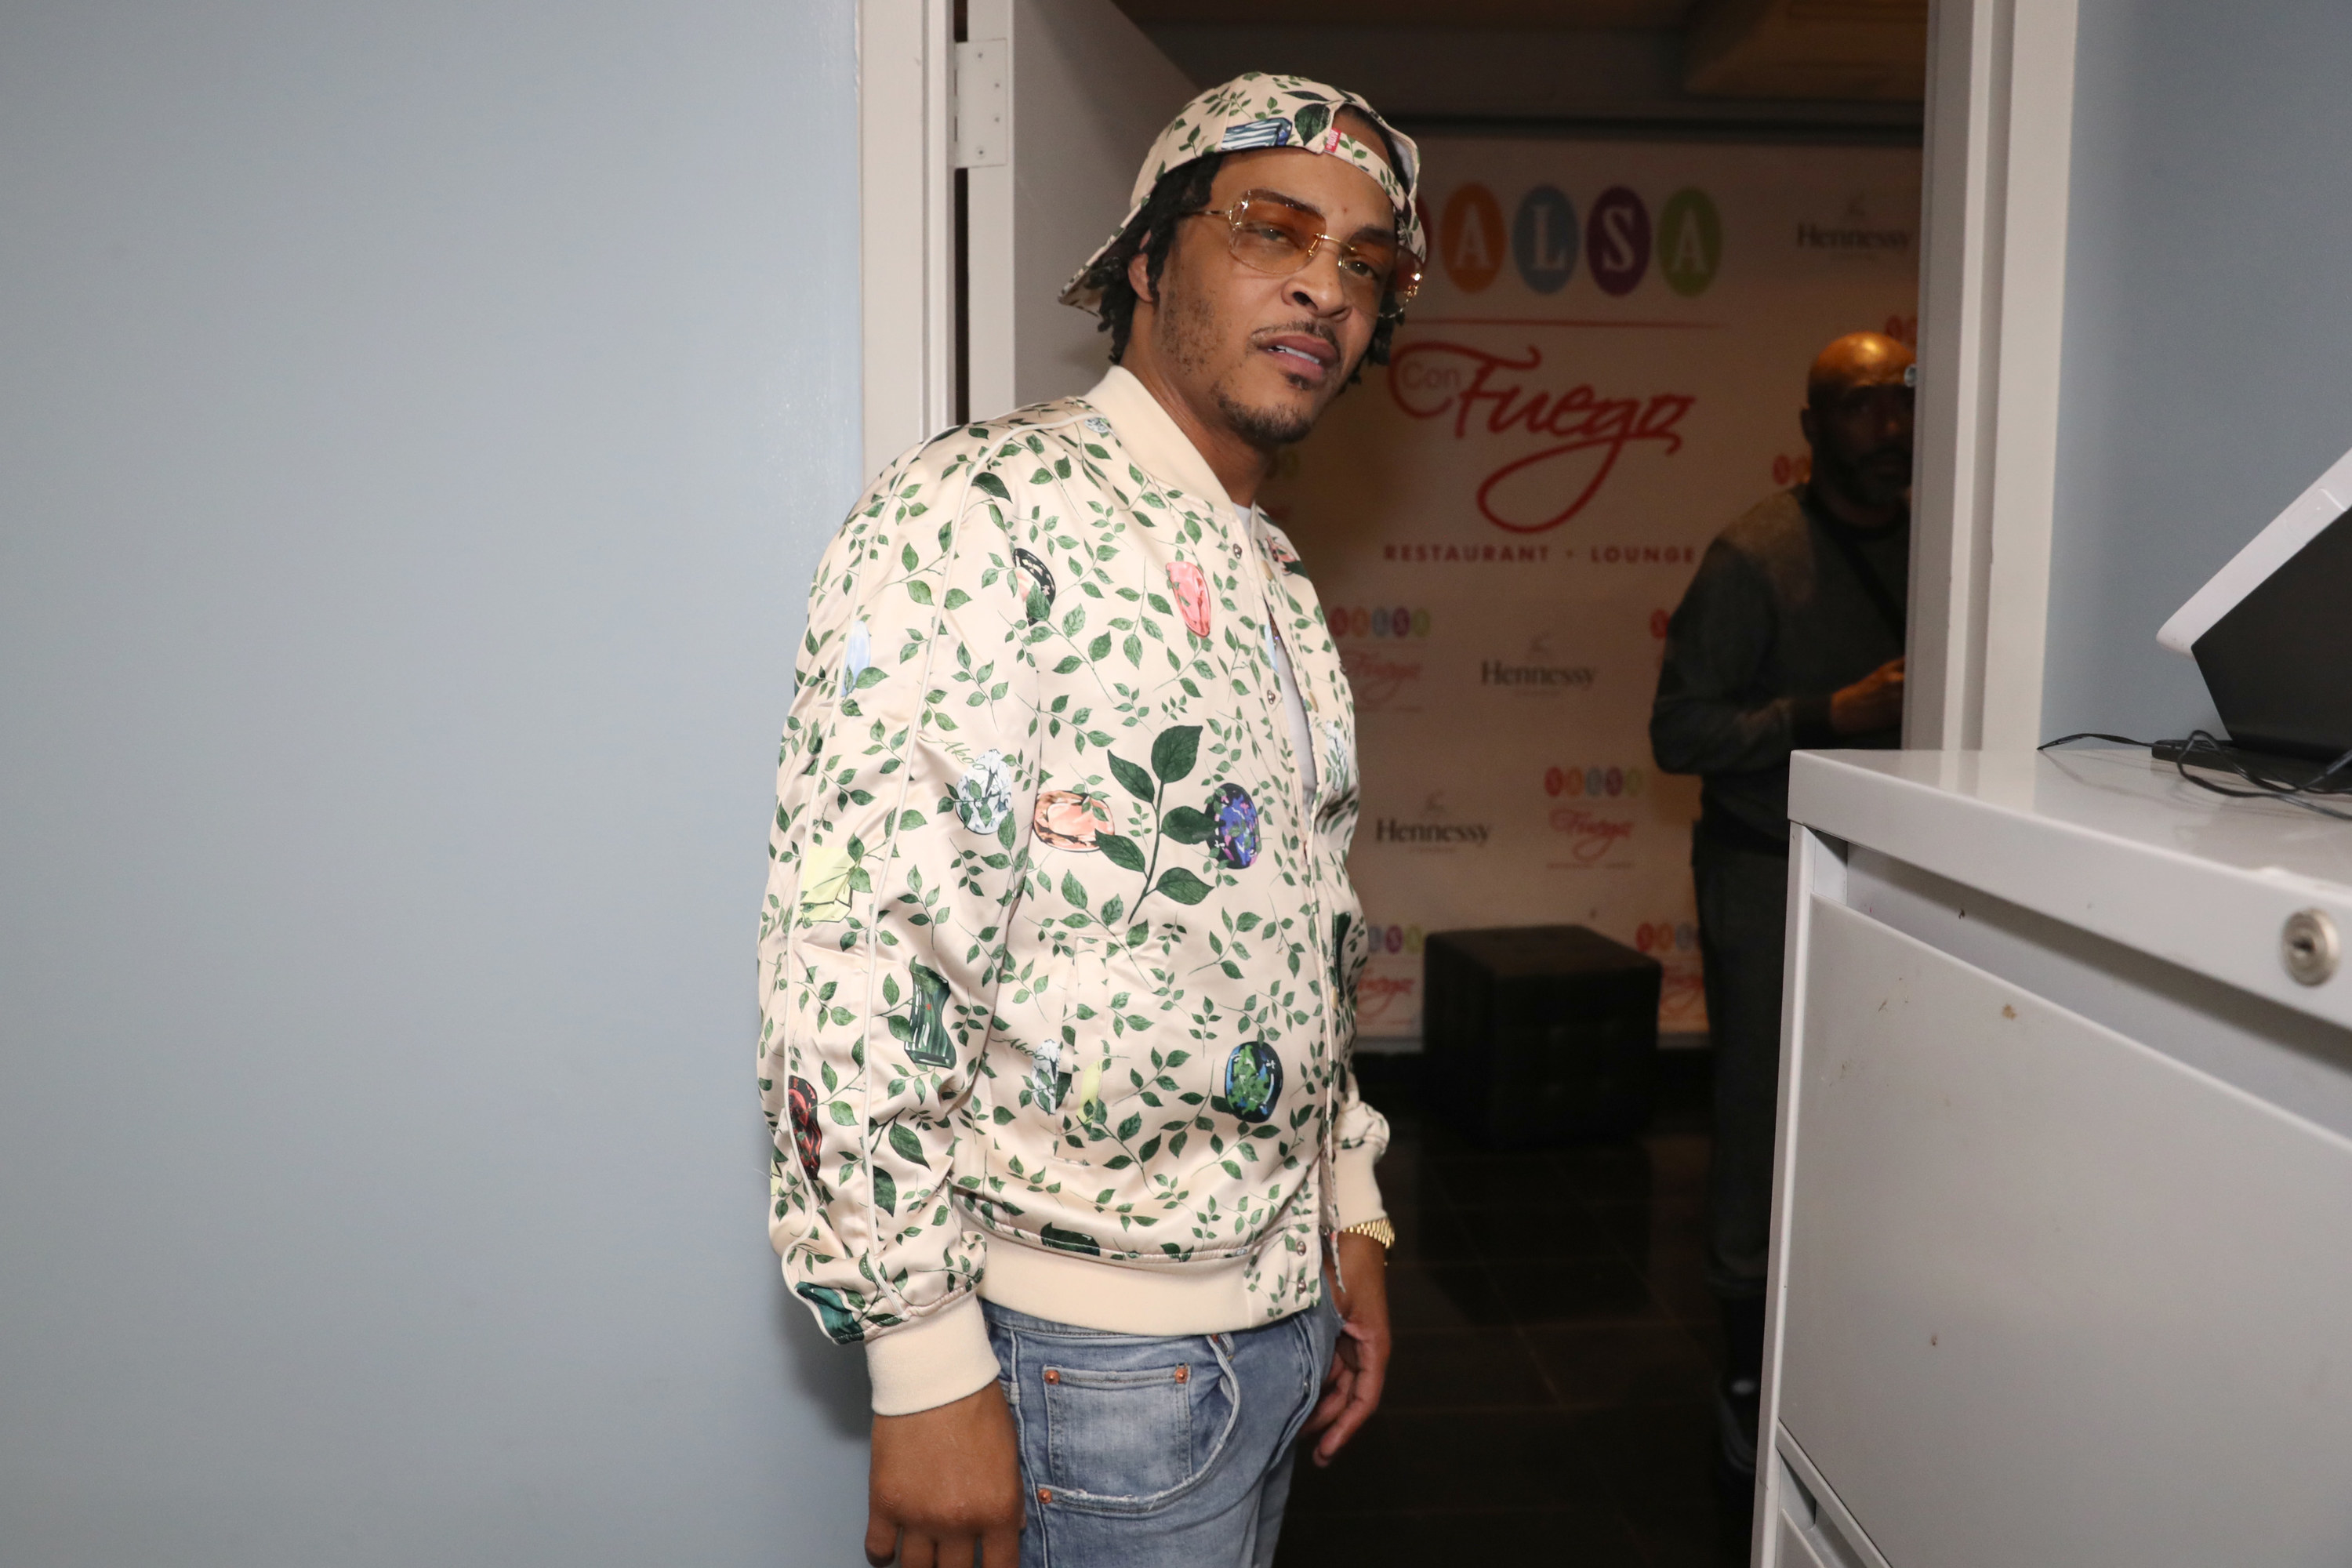 TI at the Tip T.I. Harris &amp;amp; Friends event at Salsa Con Fuego on October 26, 2022